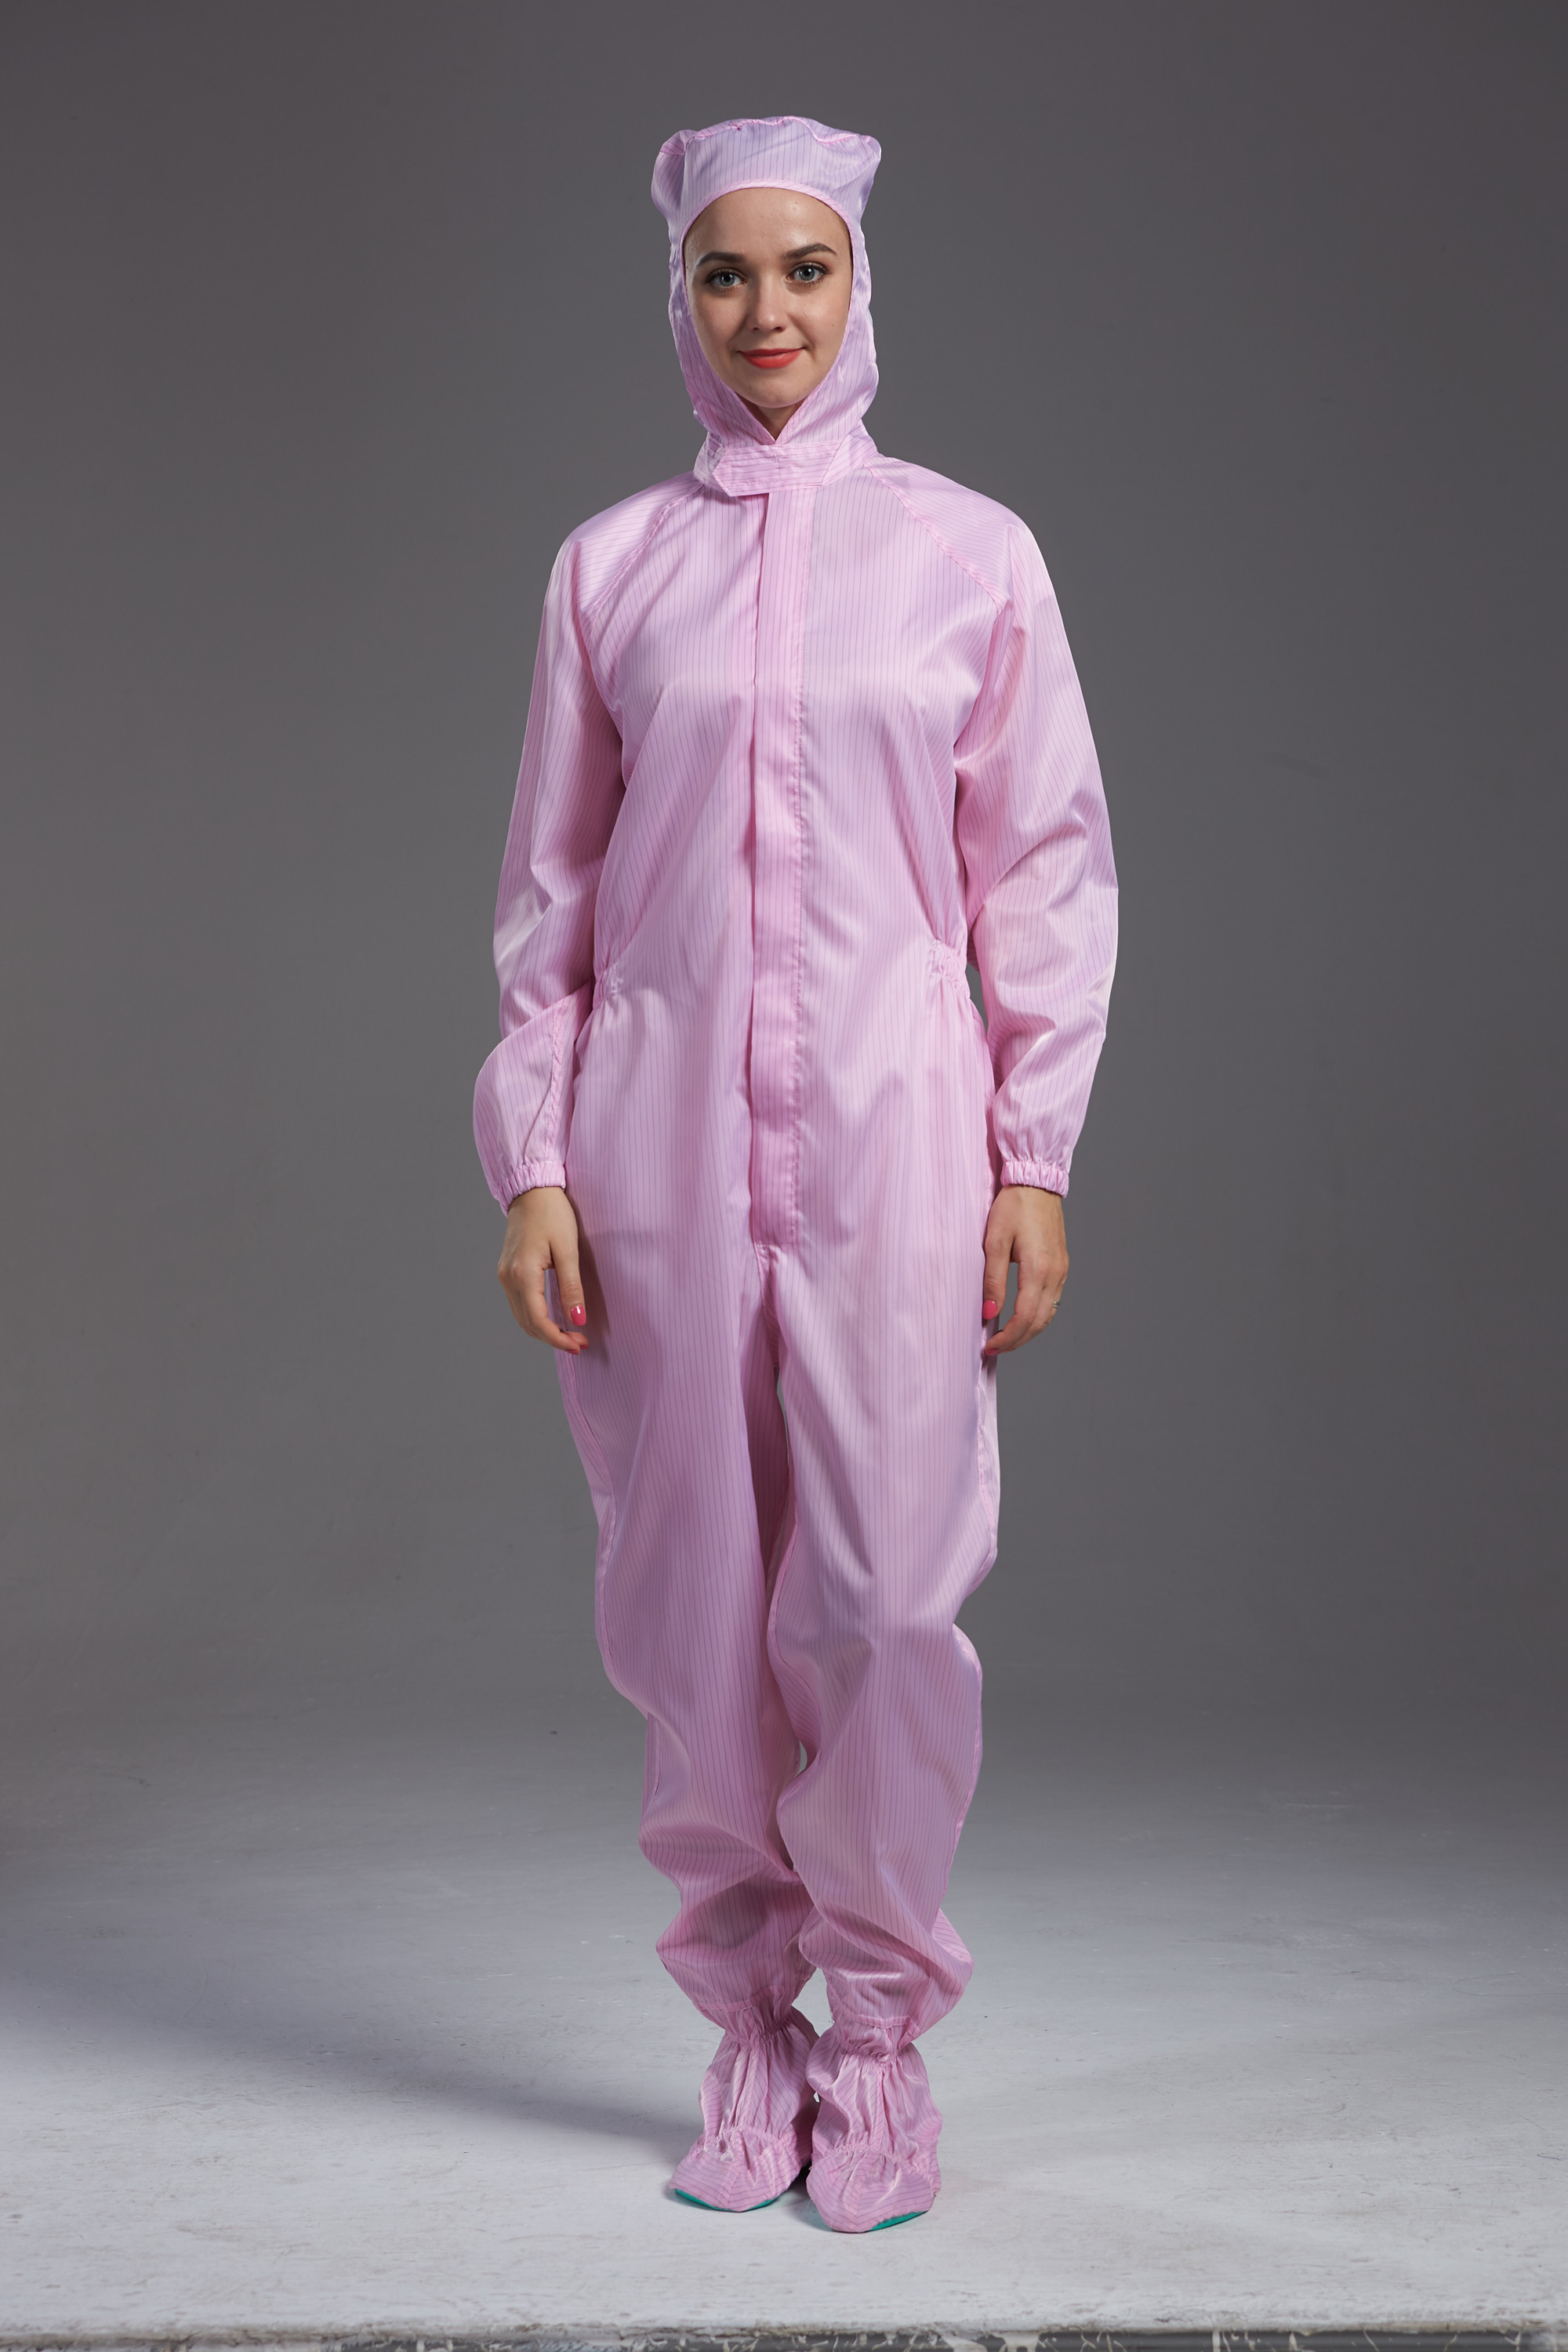 Best Safety Food Factory Uniform , Esd Bunny Suits Protective Clothing wholesale